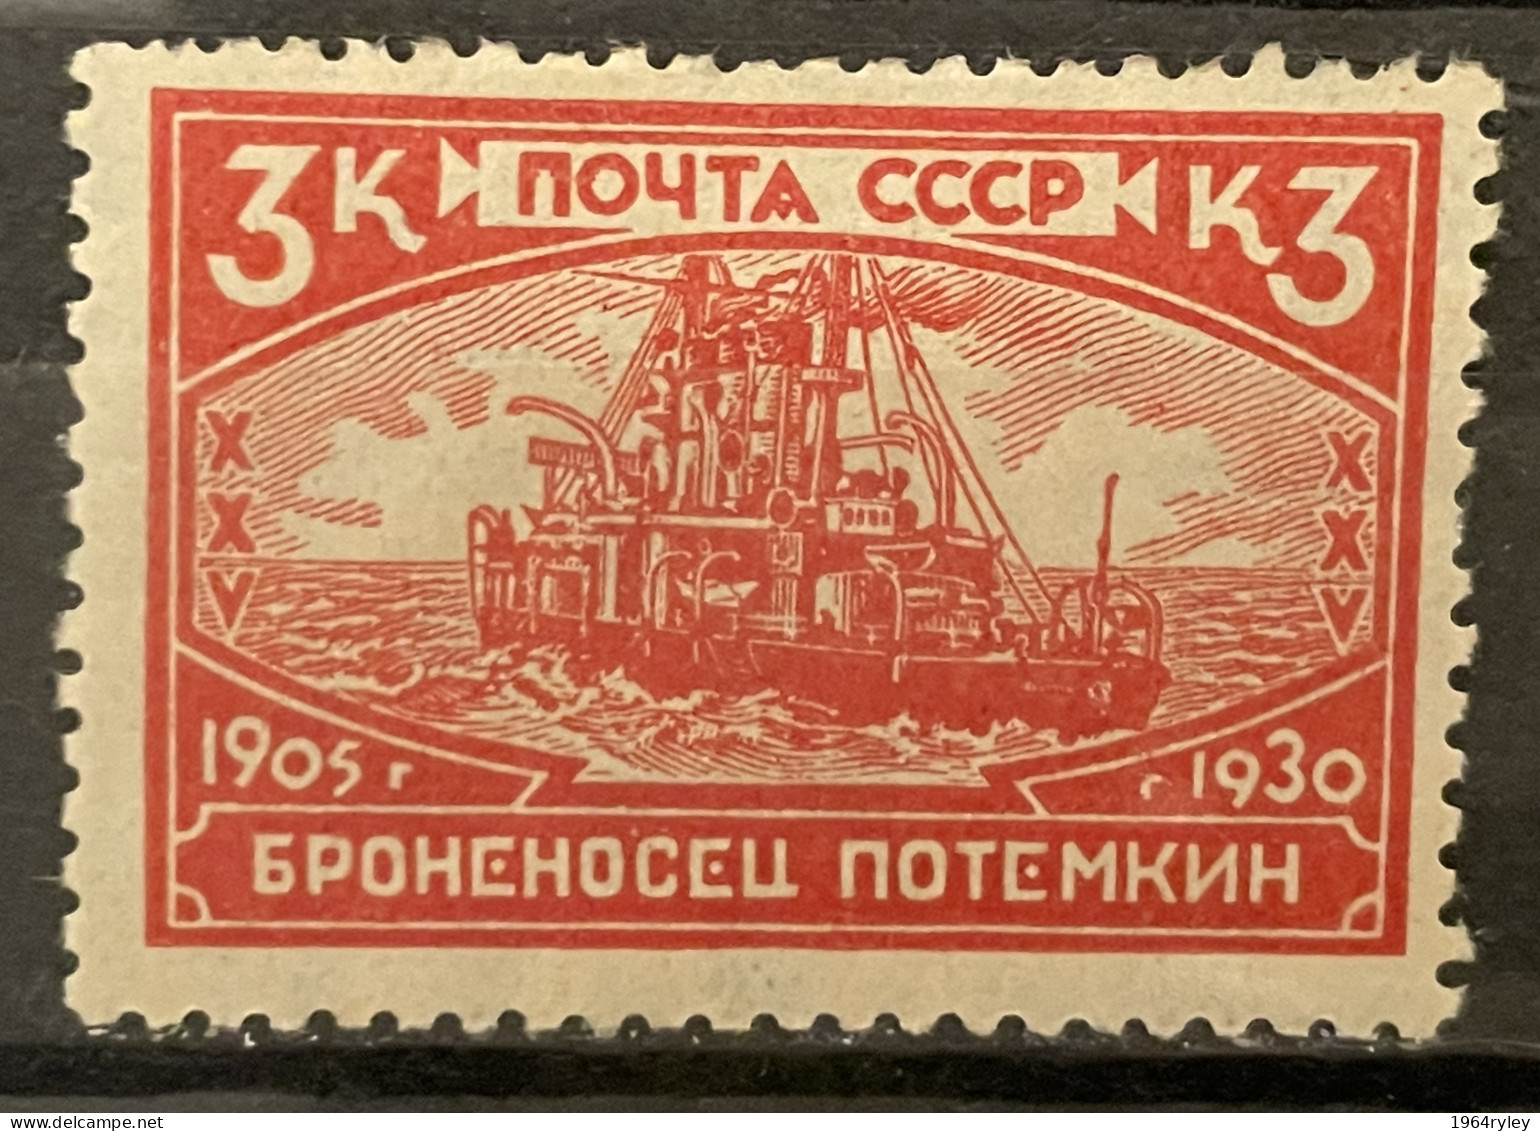 RUSSIA - MH* - 1930  - # 394 - Unused Stamps